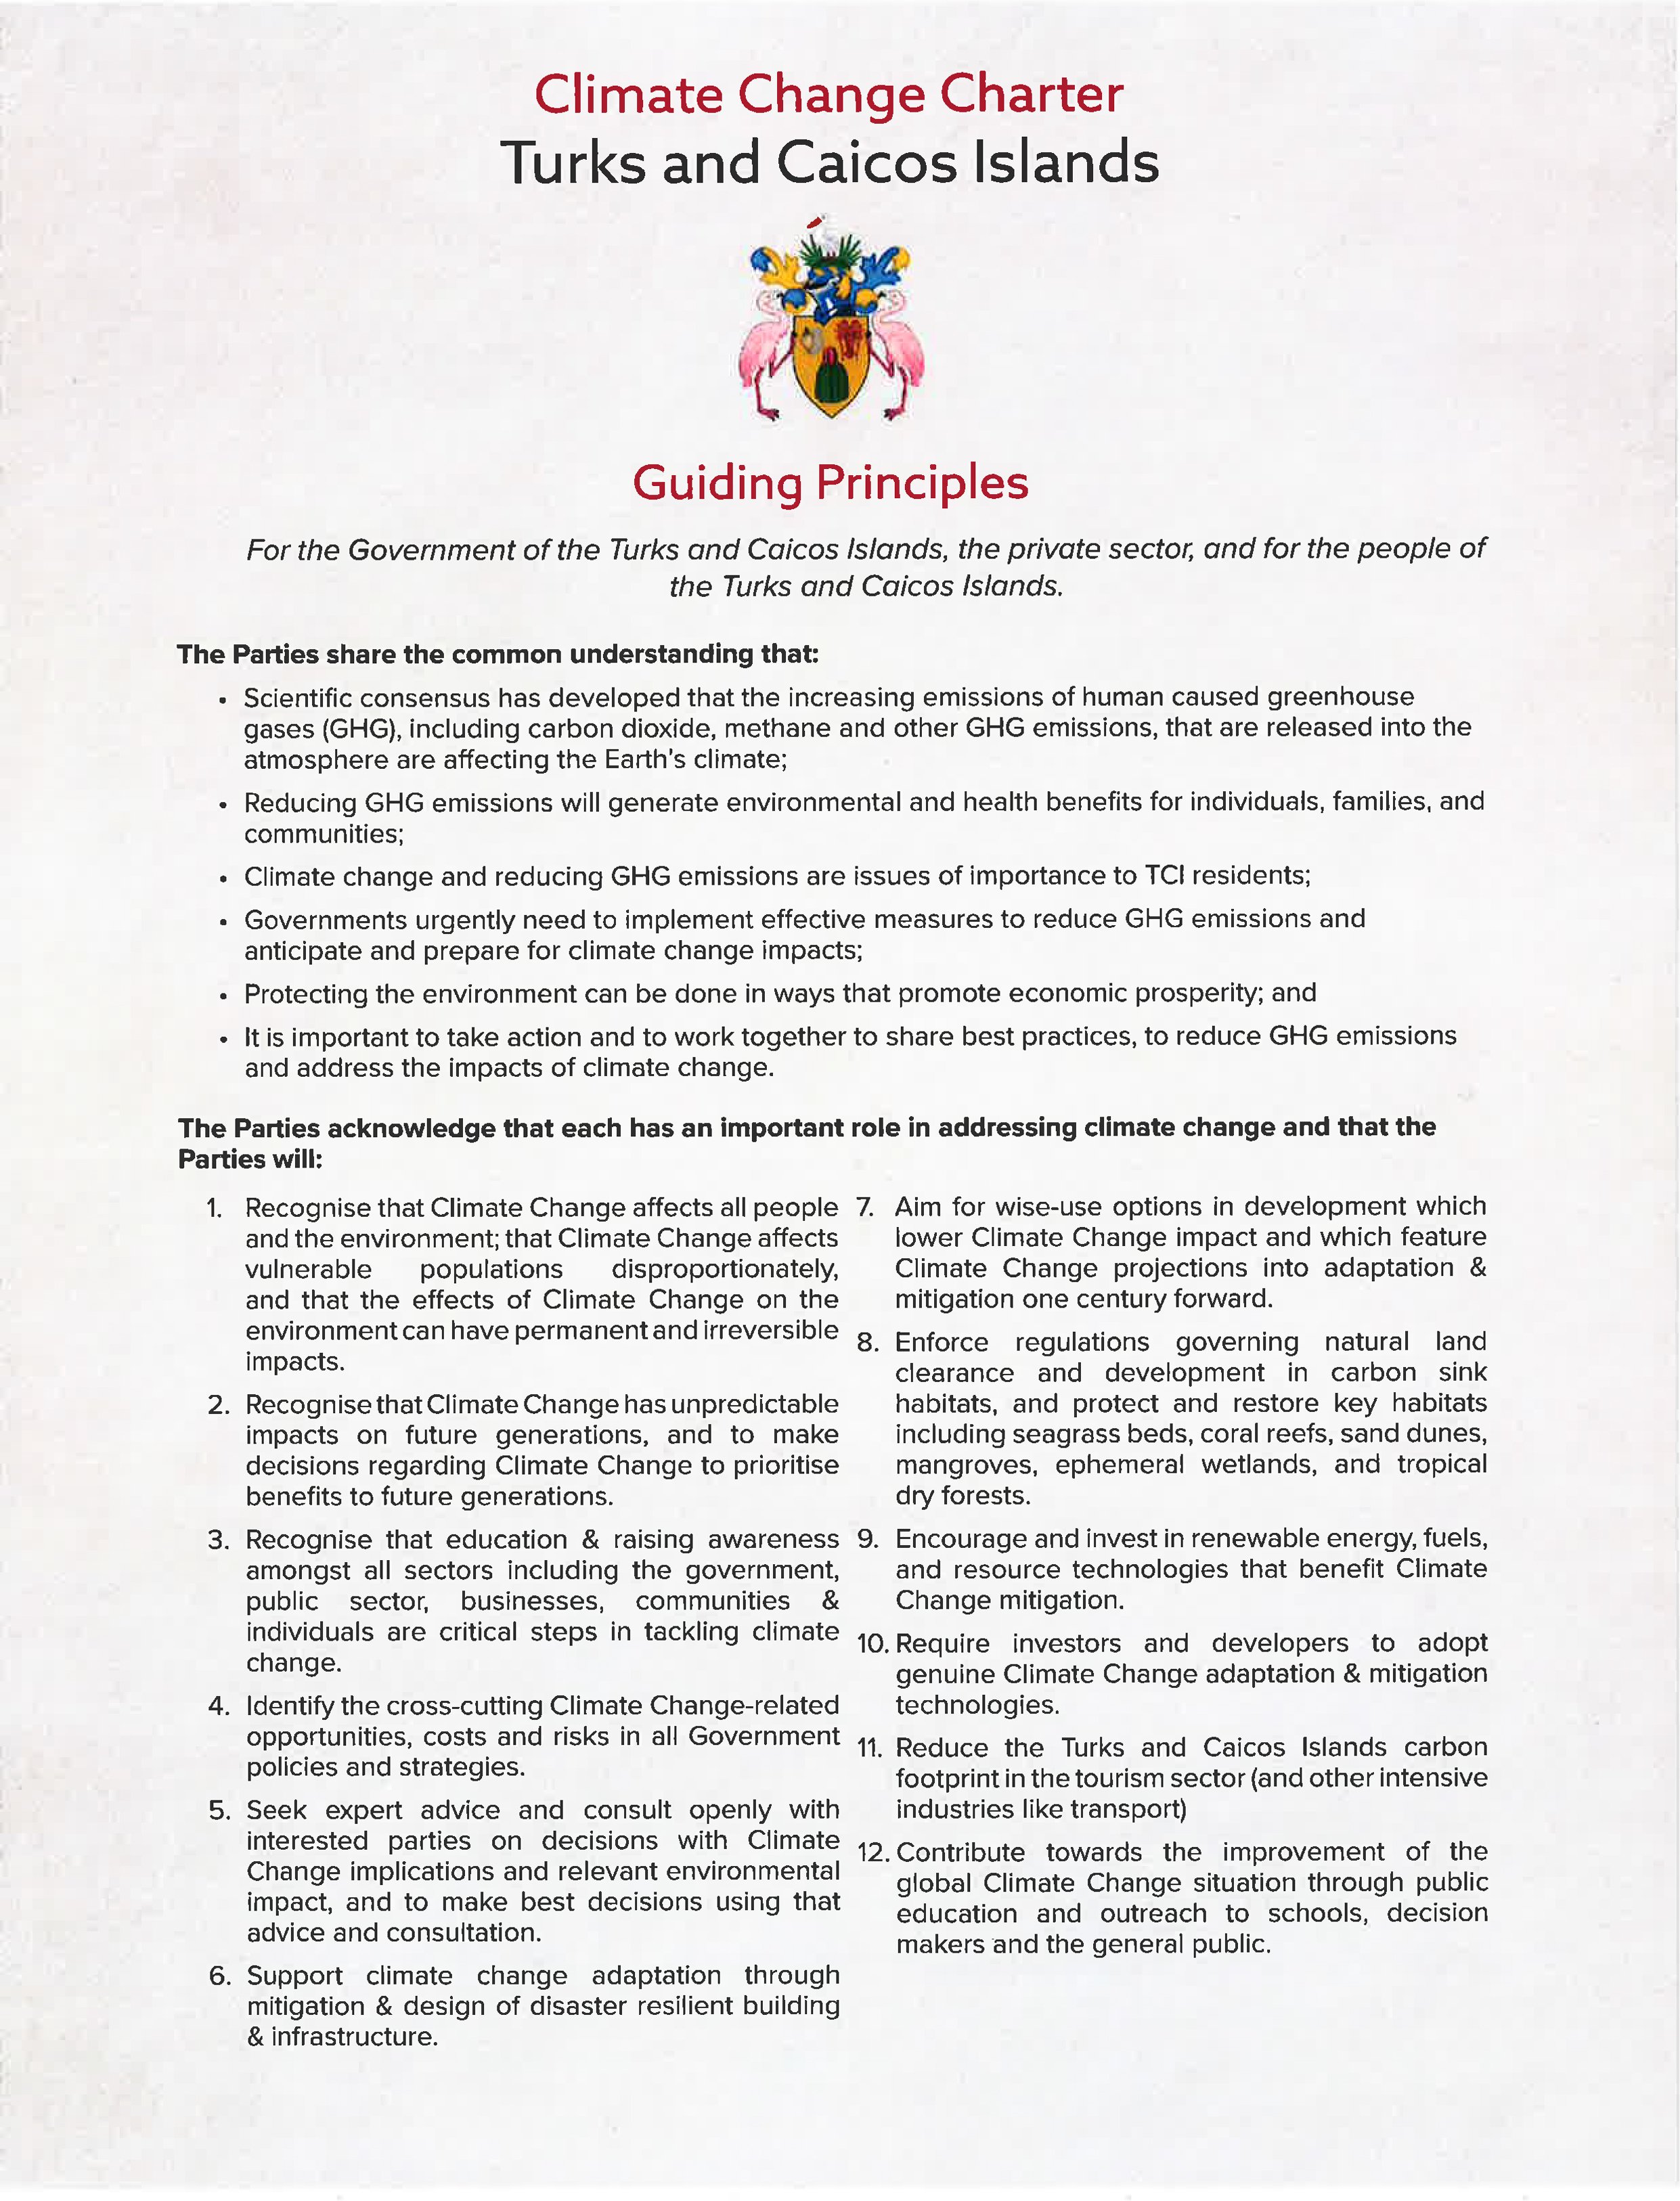 TCI Climate Change  Charter1_Signed-1 copy.jpg